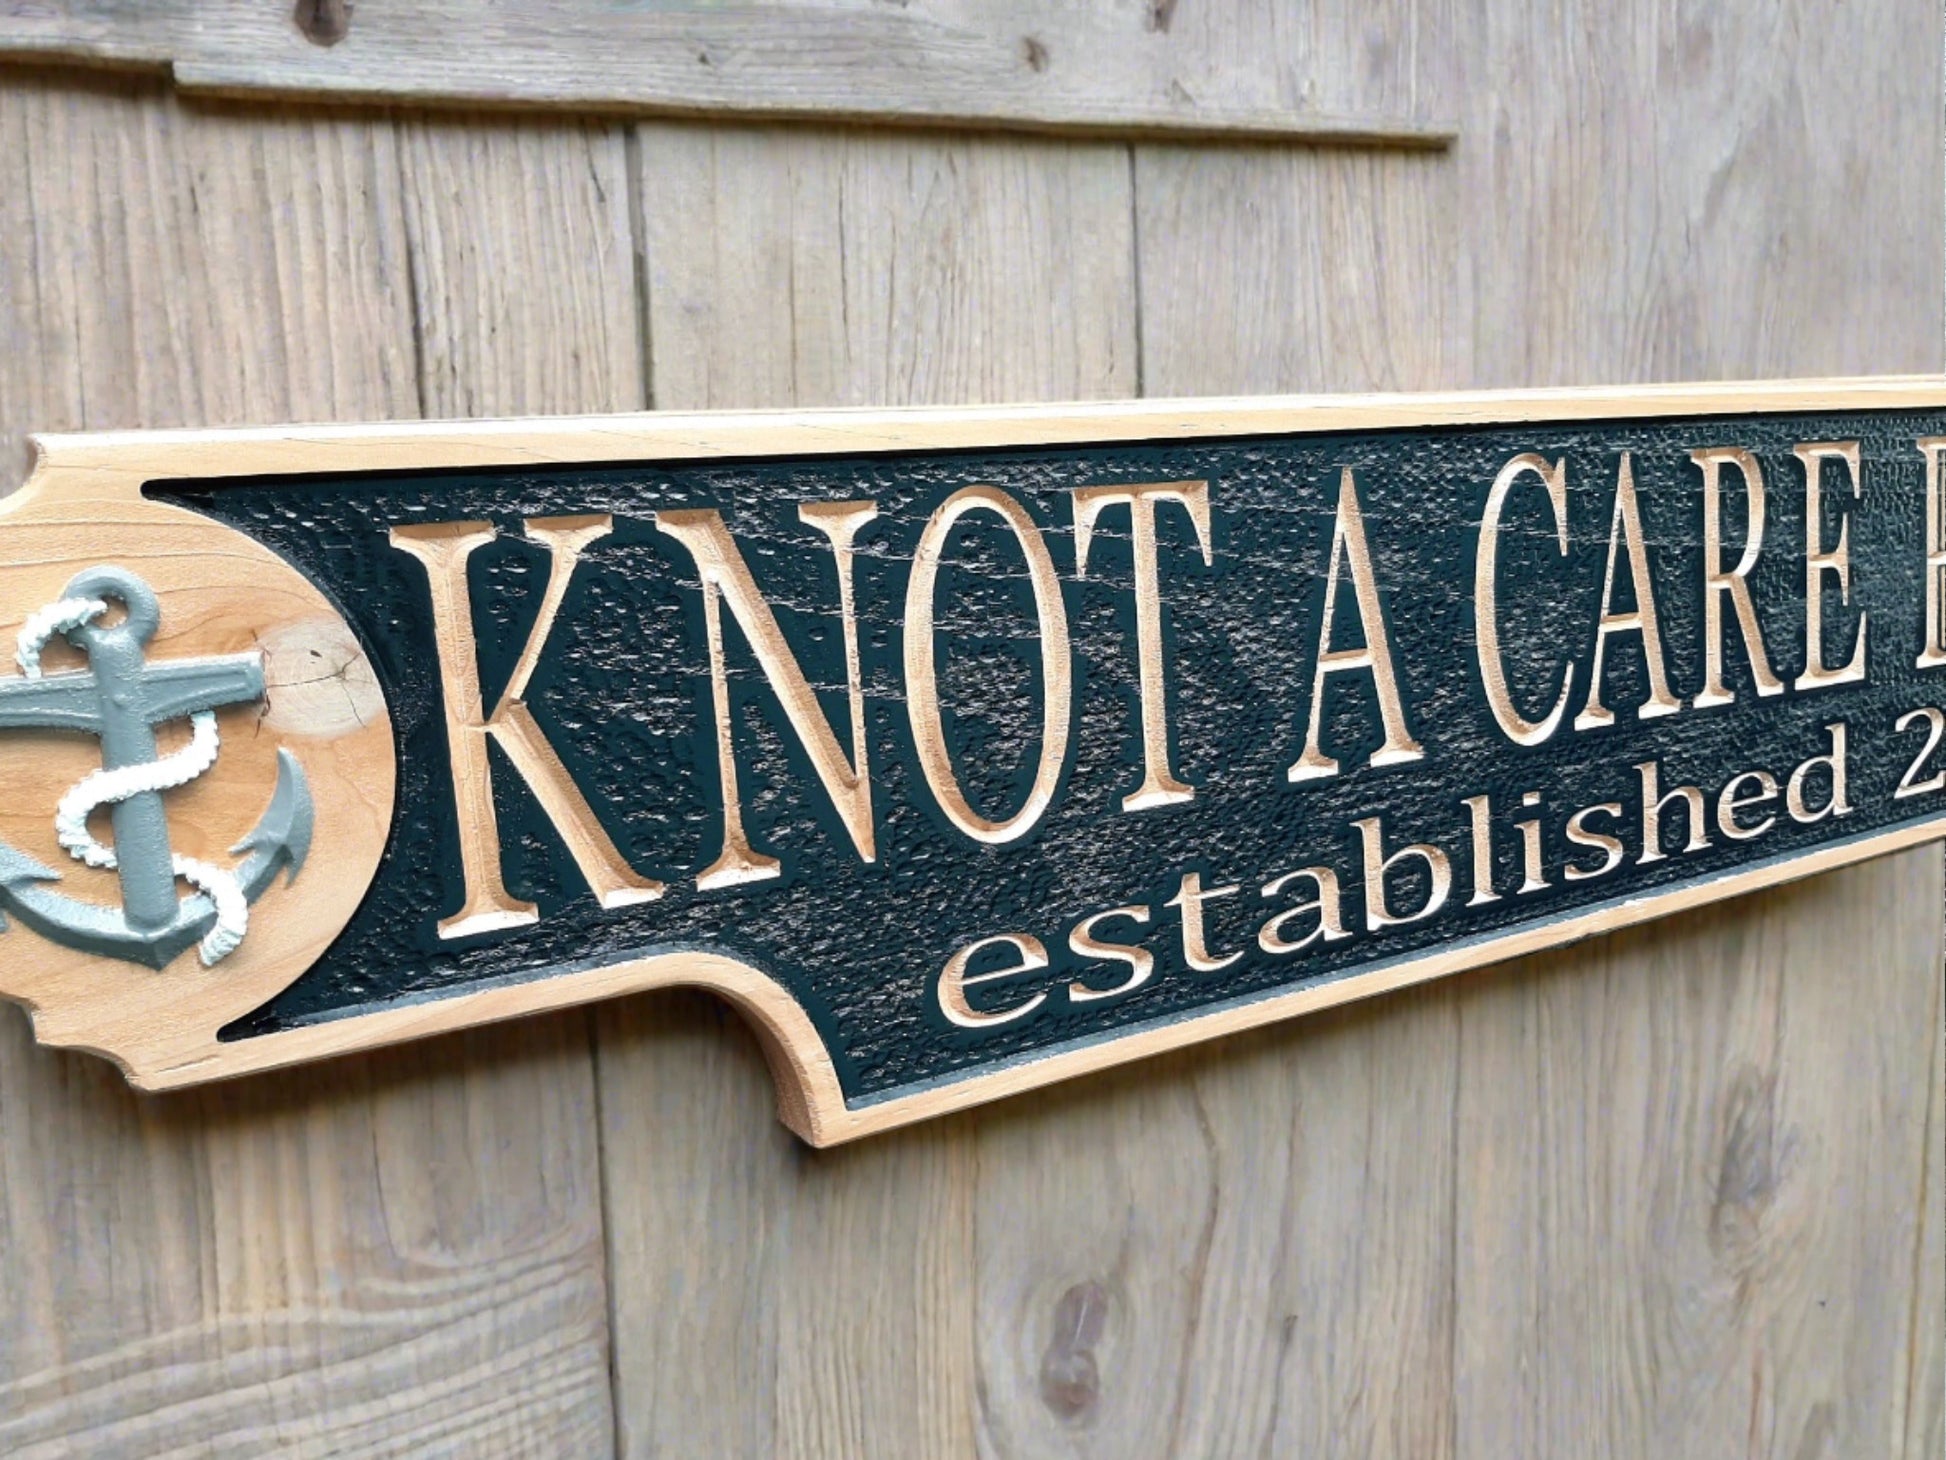 red cedar large outdoor driveway sign, nautical quarter board made in the USA.